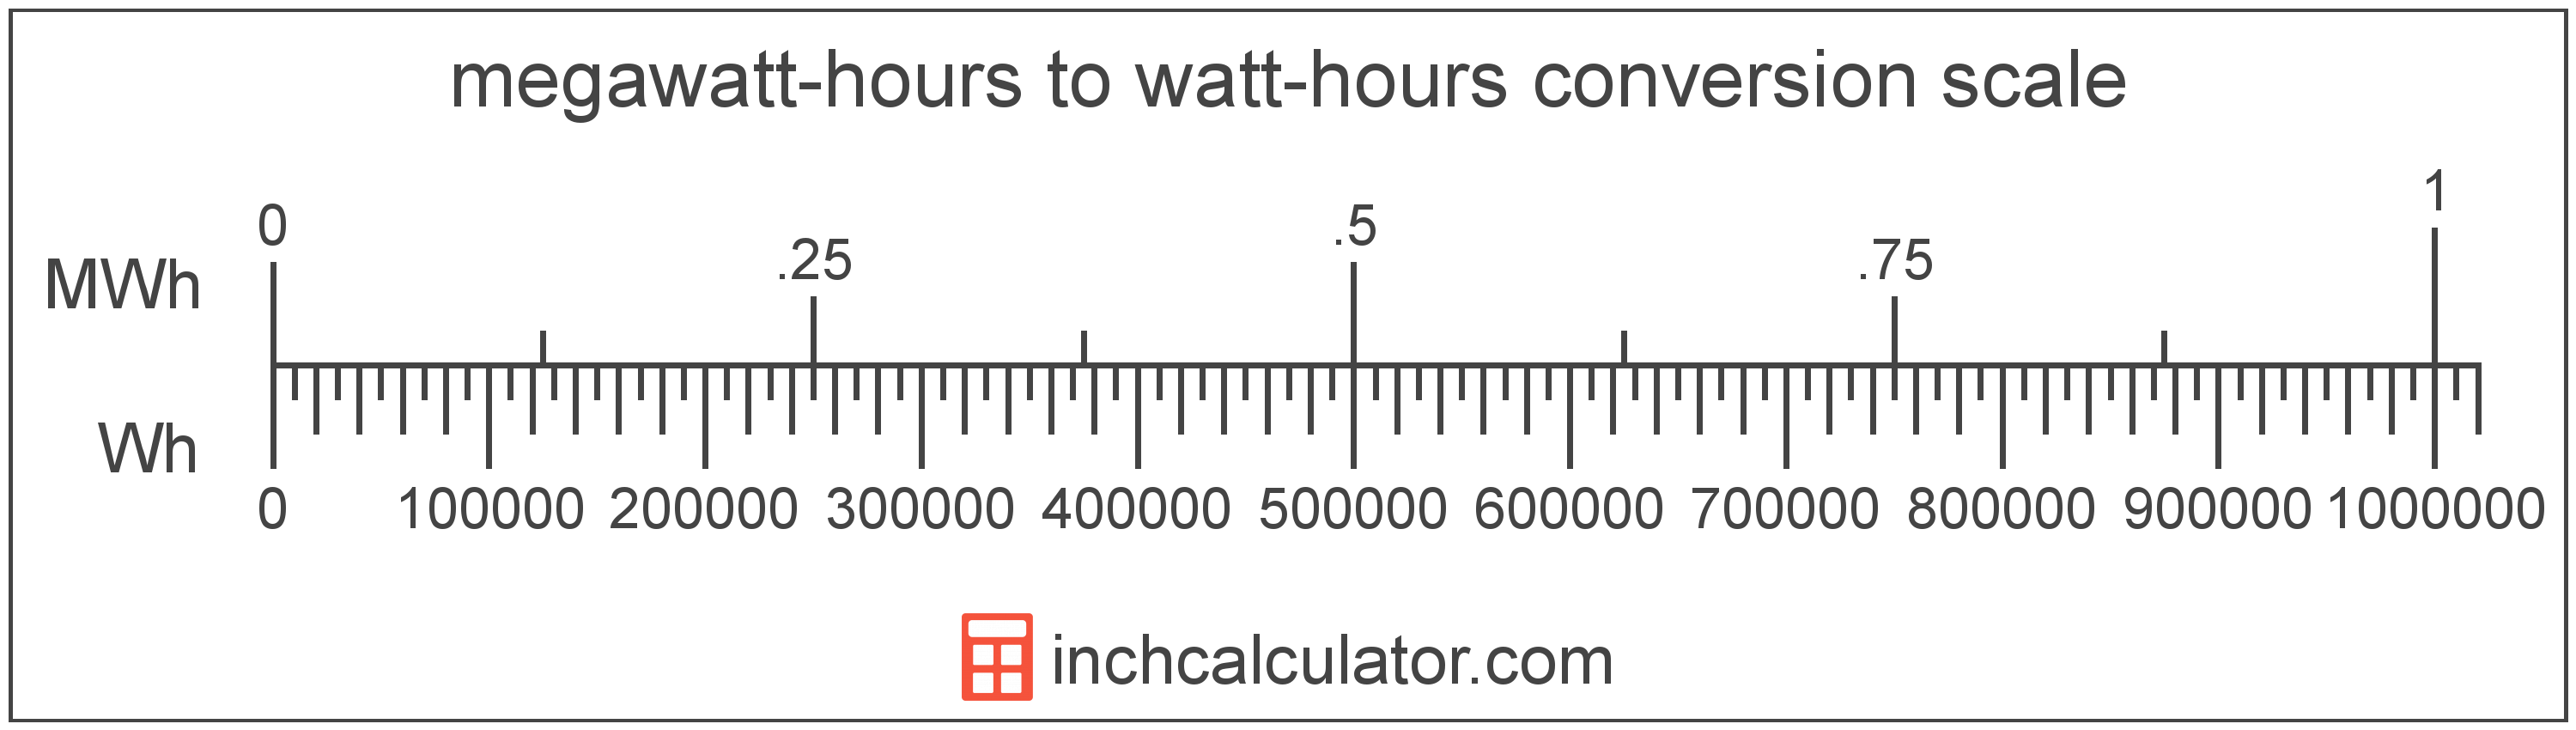 conversion scale showing watt-hours and equivalent megawatt-hours energy values